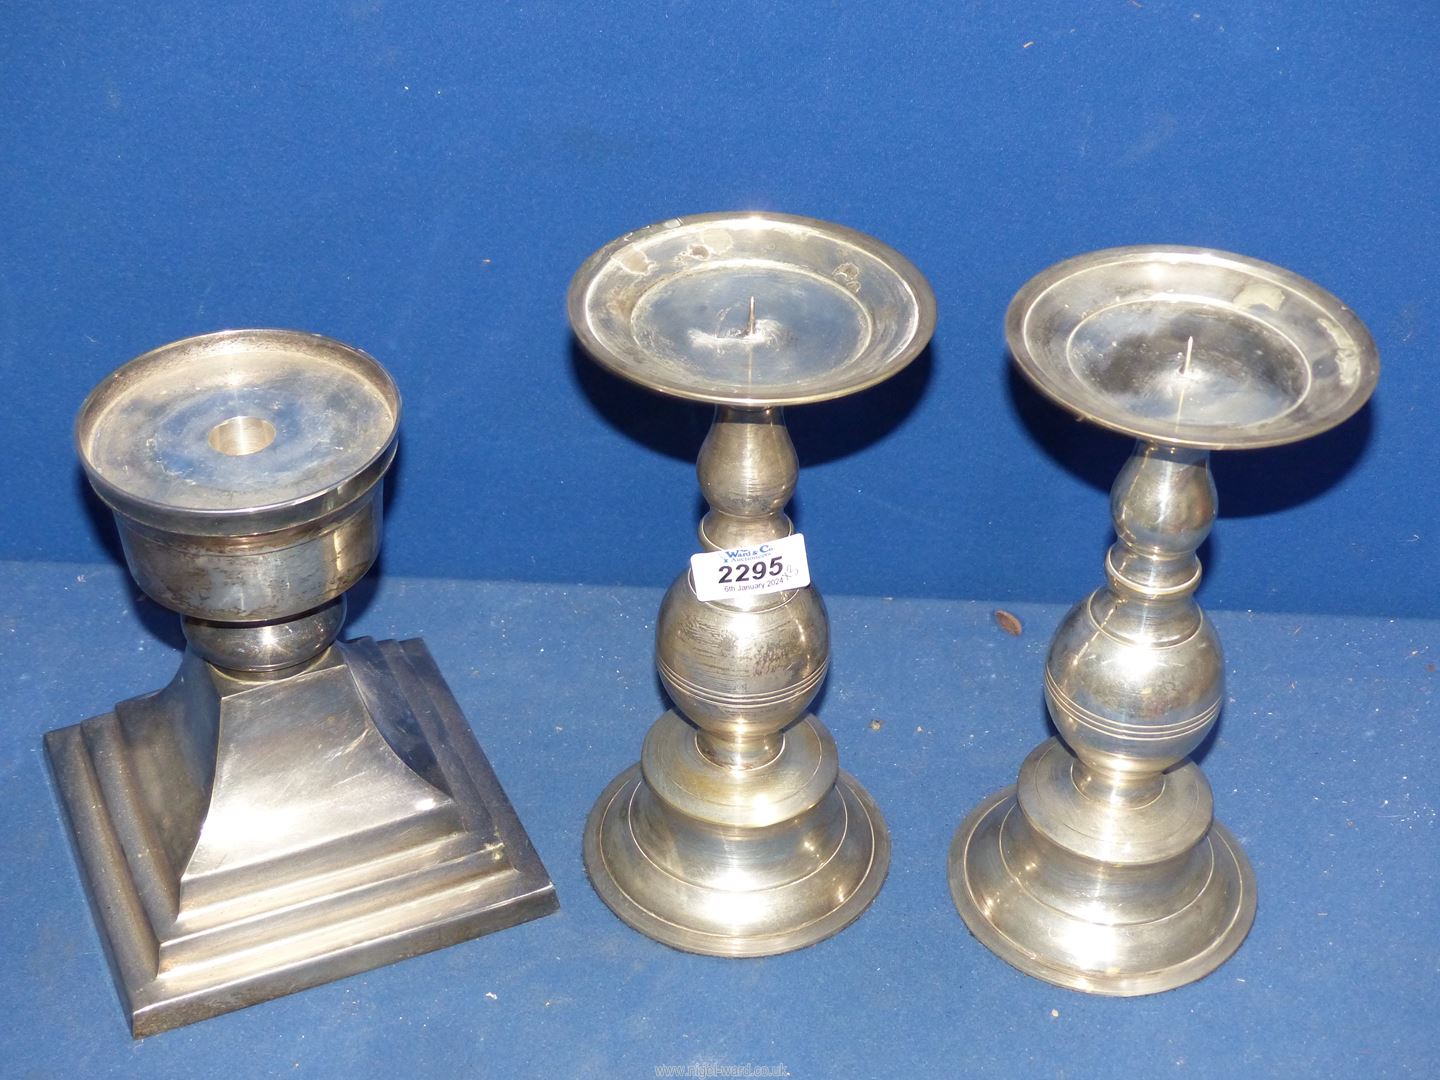 A large pair of plated pricket stands and a large plated stand. - Image 2 of 2